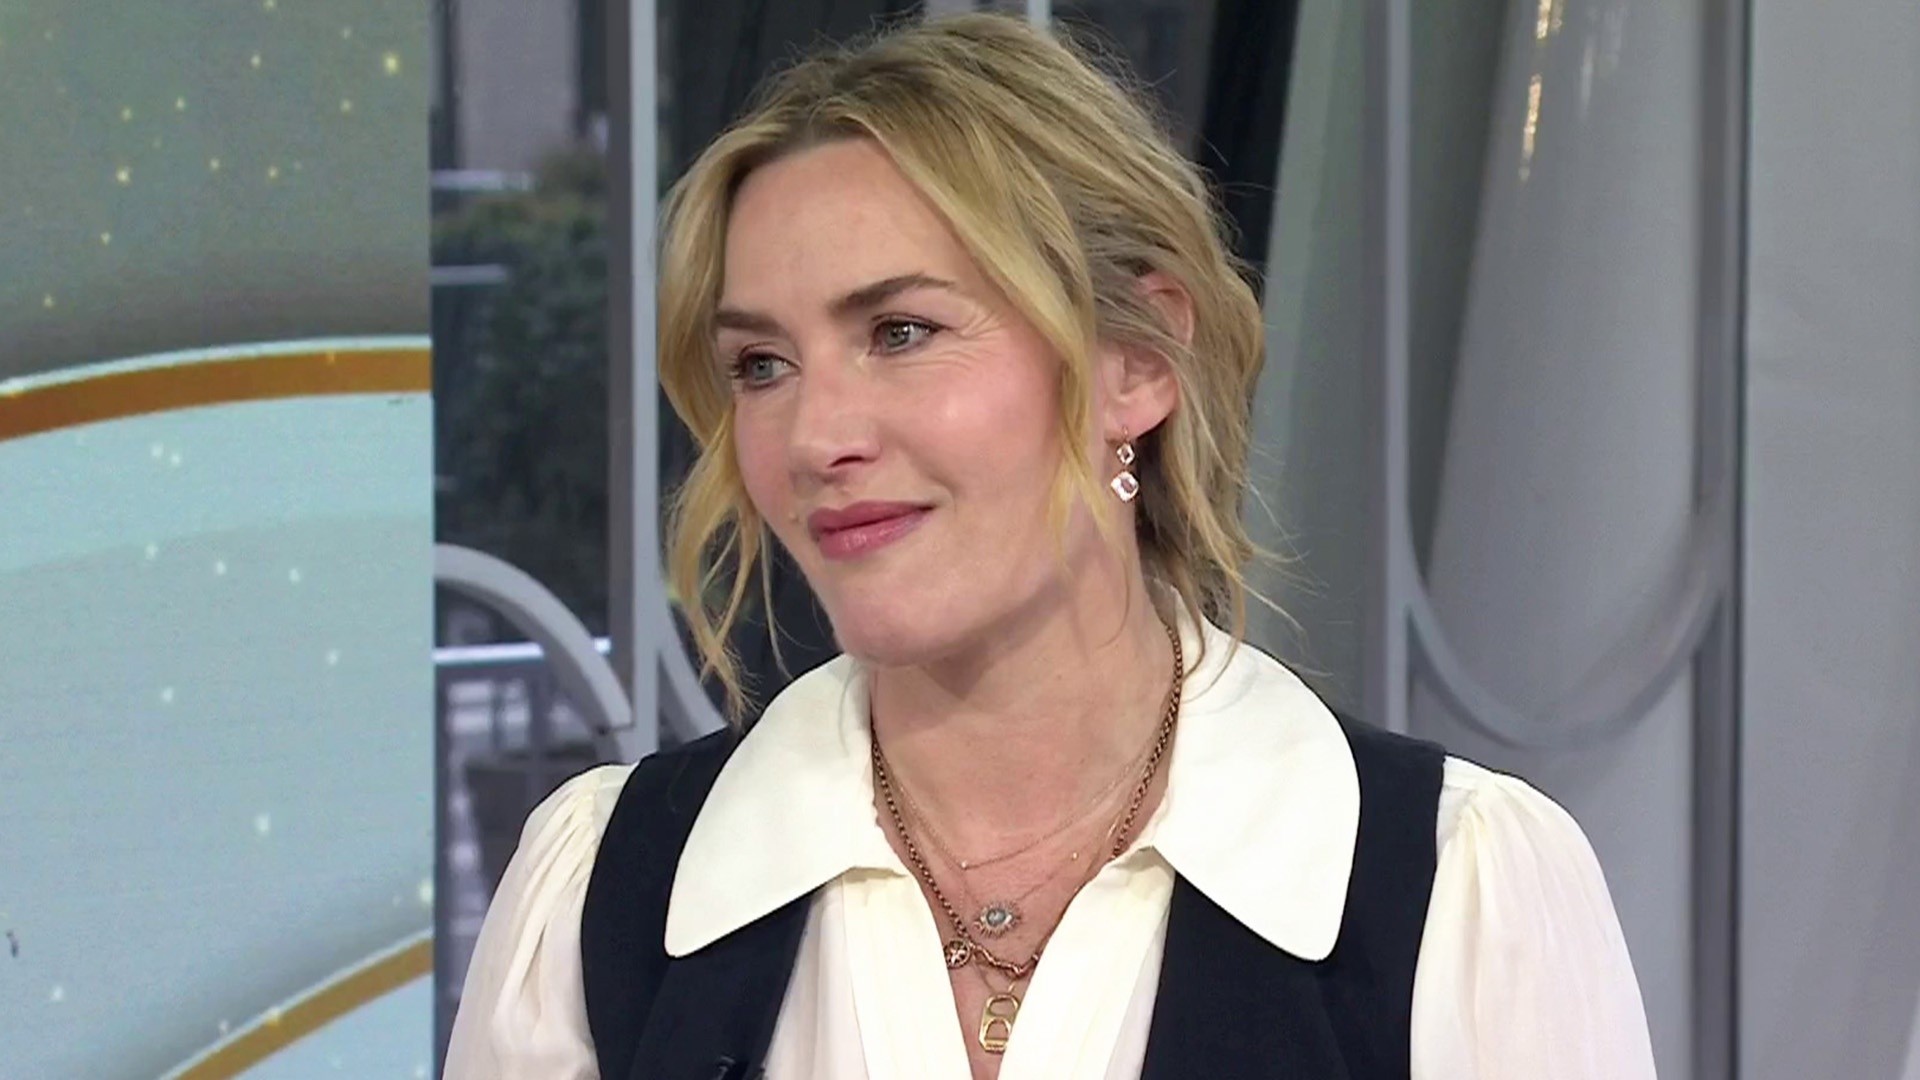 Kate Winslet on 'The Regime,' daughter Mia, championing women